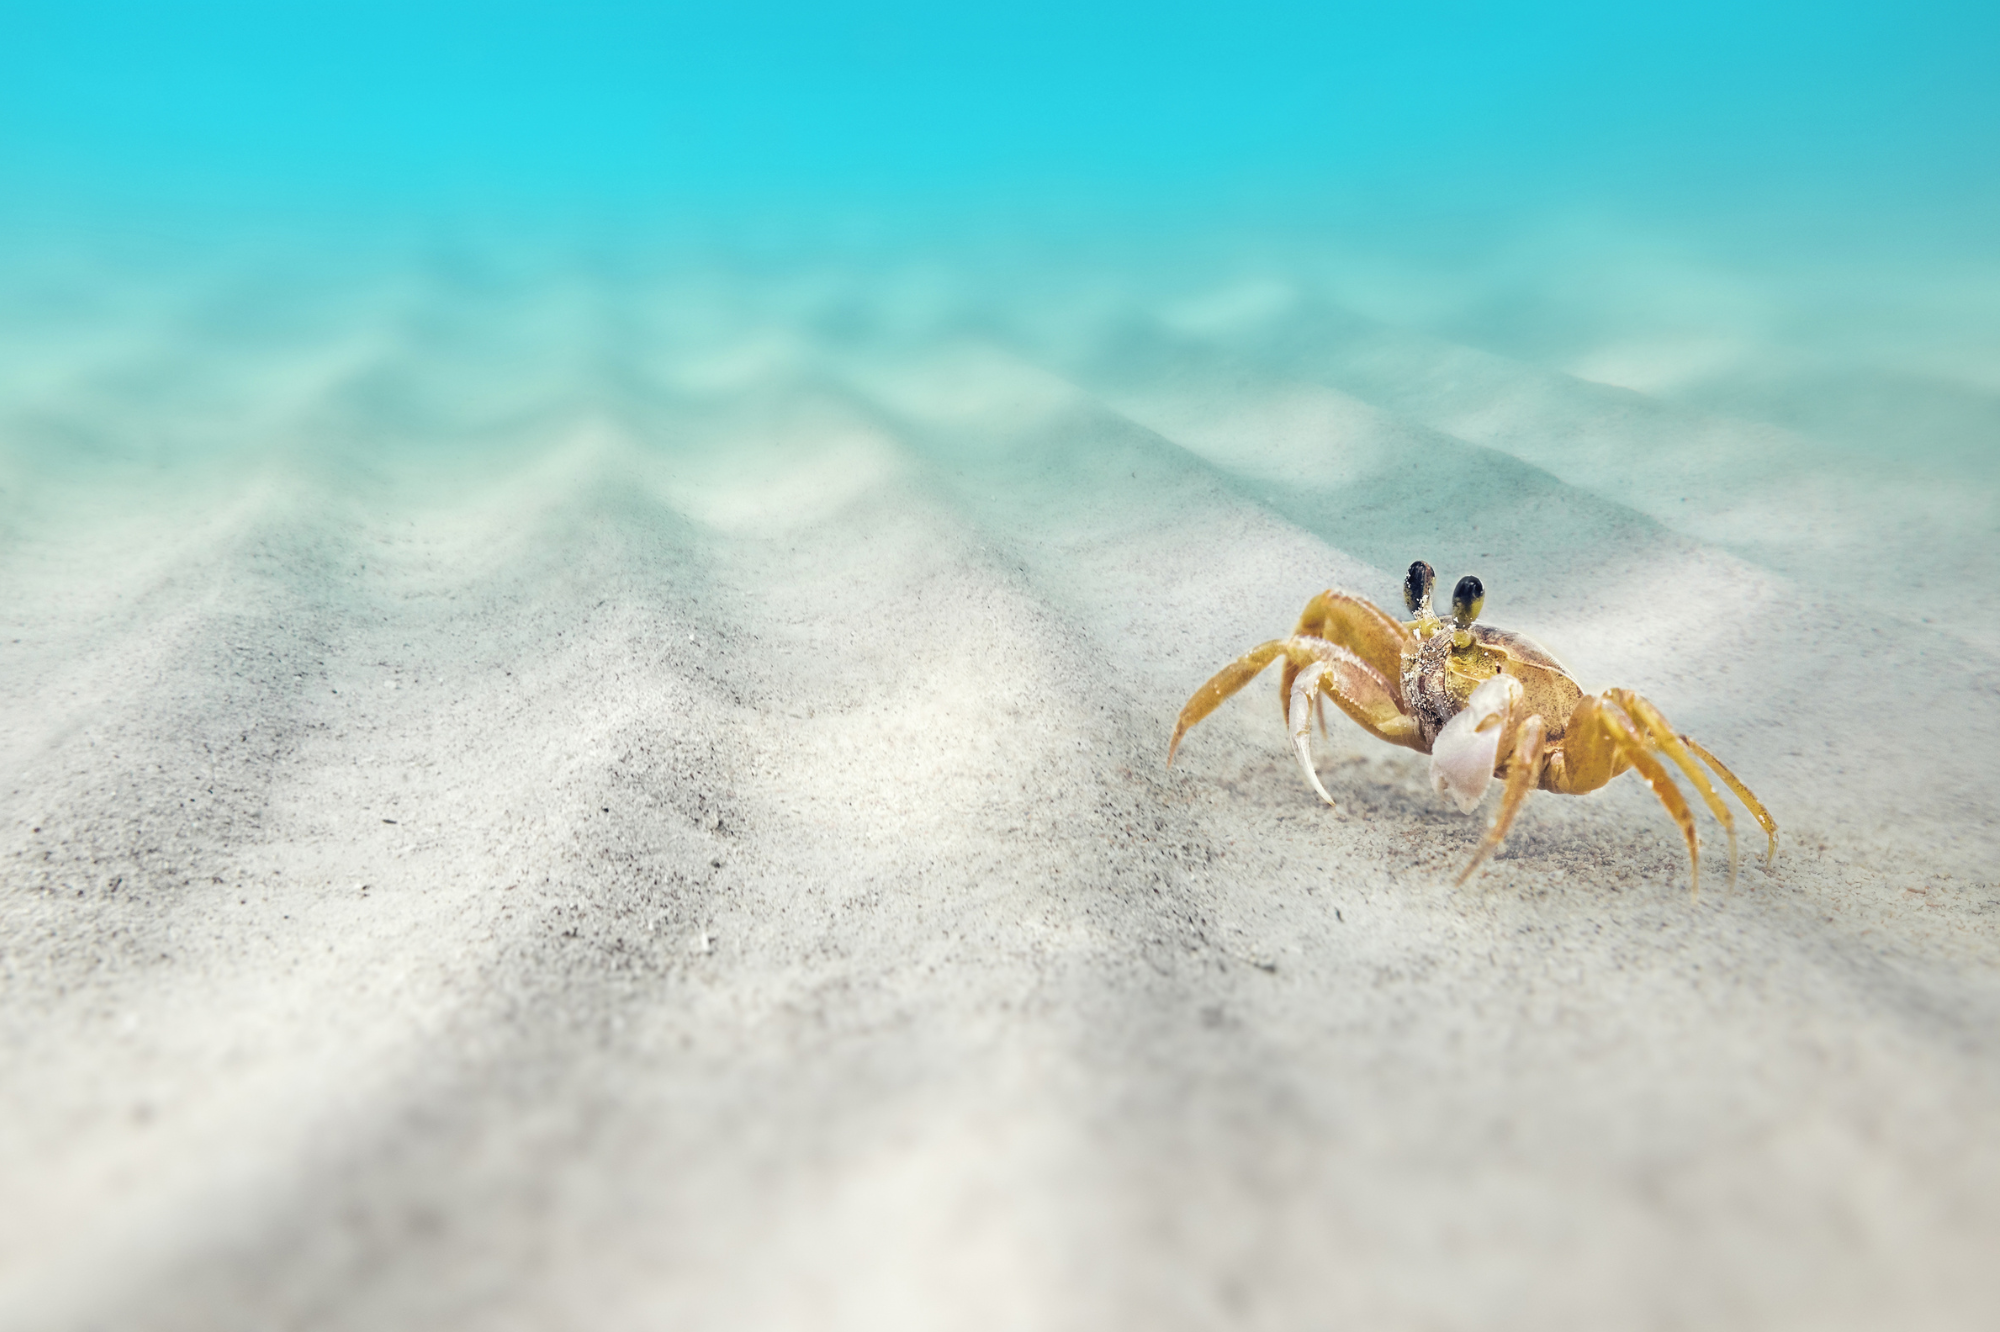 A small crab on the sea floor.